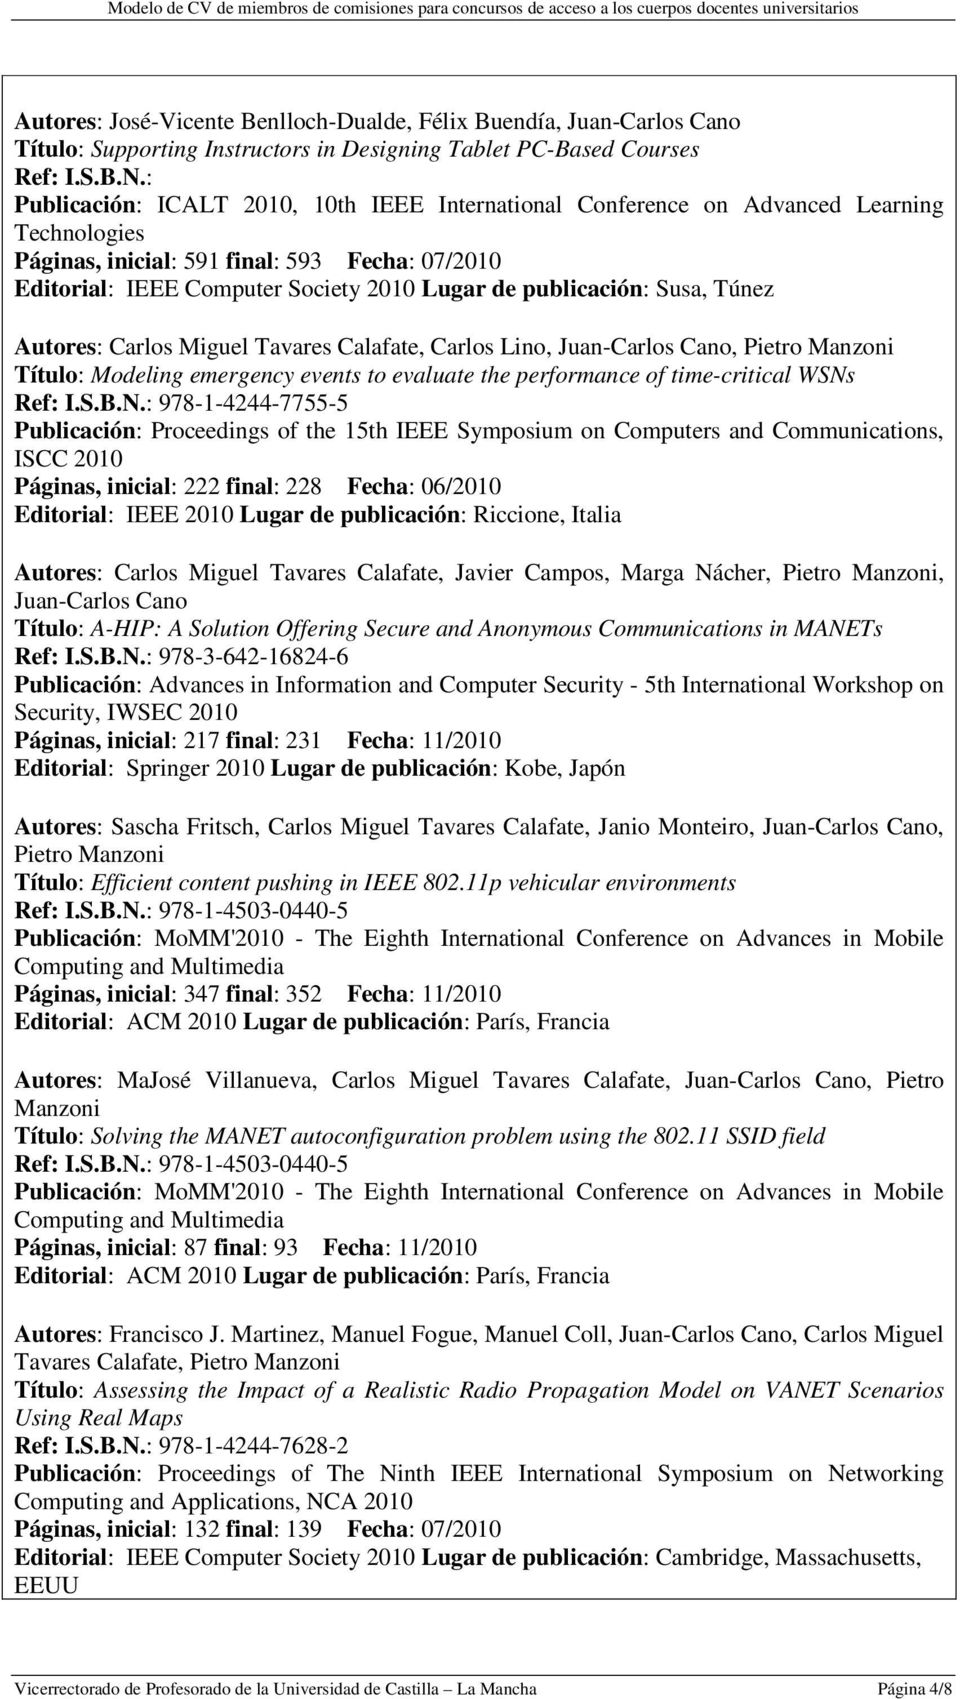 Carlos Lino, Juan-Carlos Cano, Pietro Título: Modeling emergency events to evaluate the performance of time-critical WSNs 978-1-4244-7755-5 Publicación: Proceedings of the 15th IEEE Symposium on